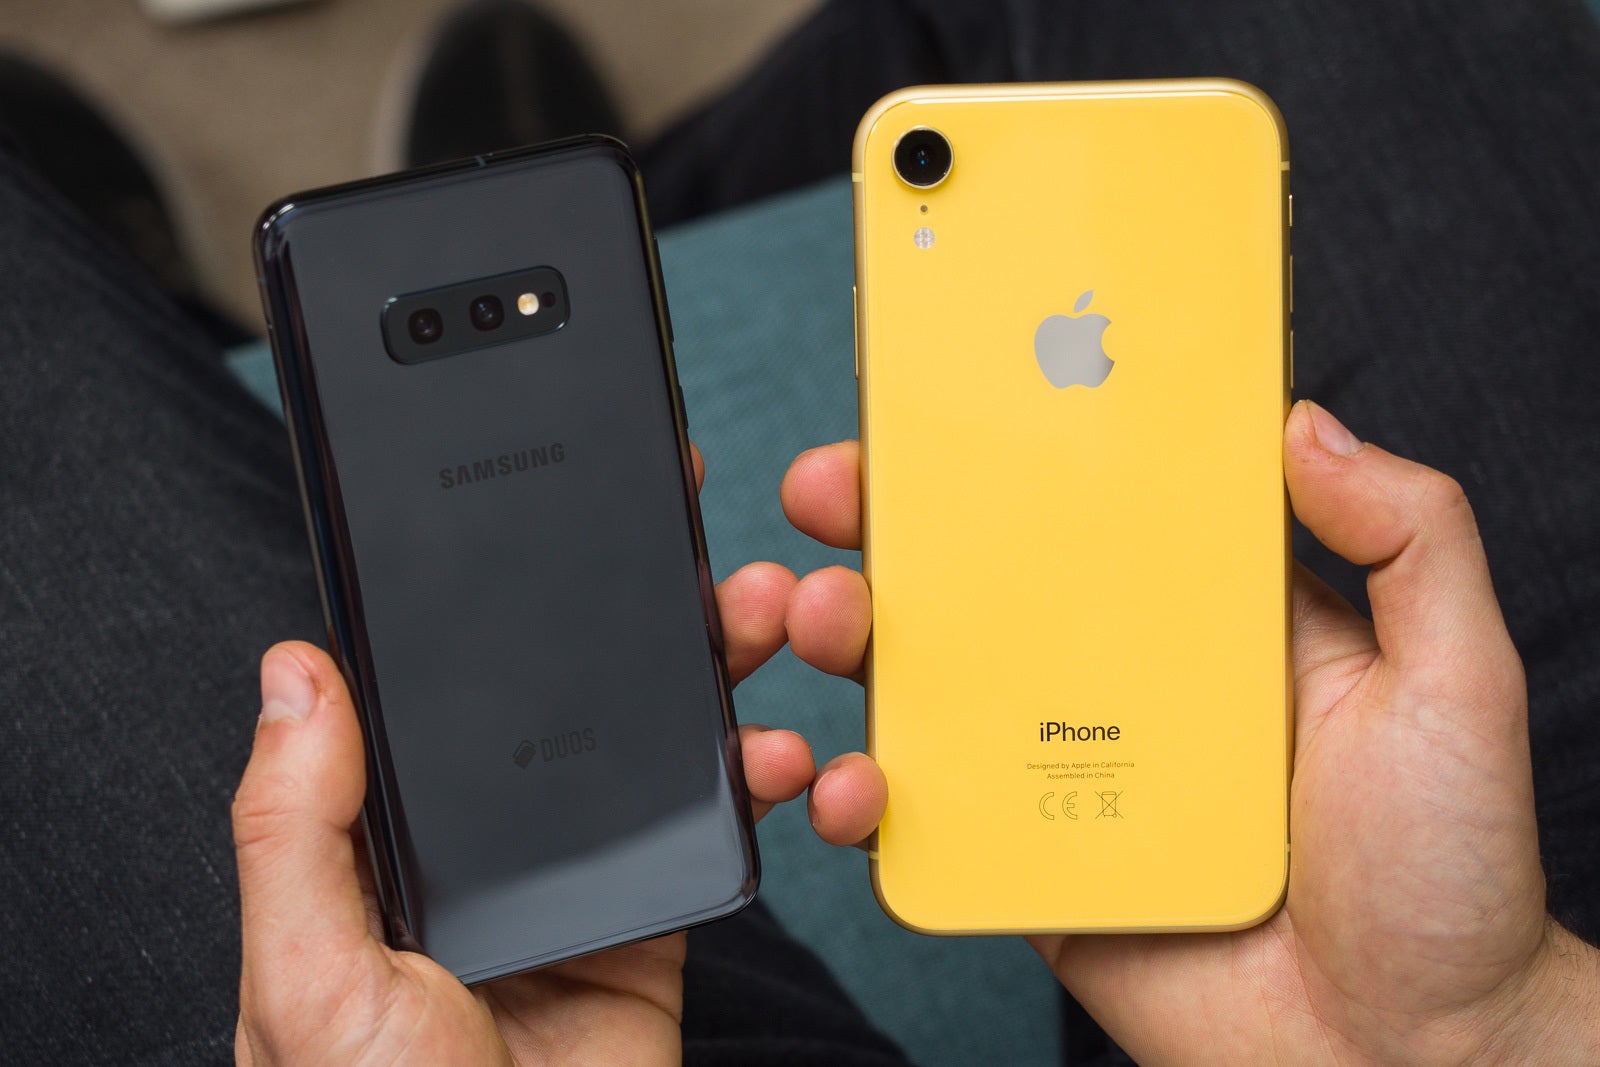 Samsung is closing in on Apple - Samsung's Galaxy S10 has outsold the Galaxy S9 by a significant margin